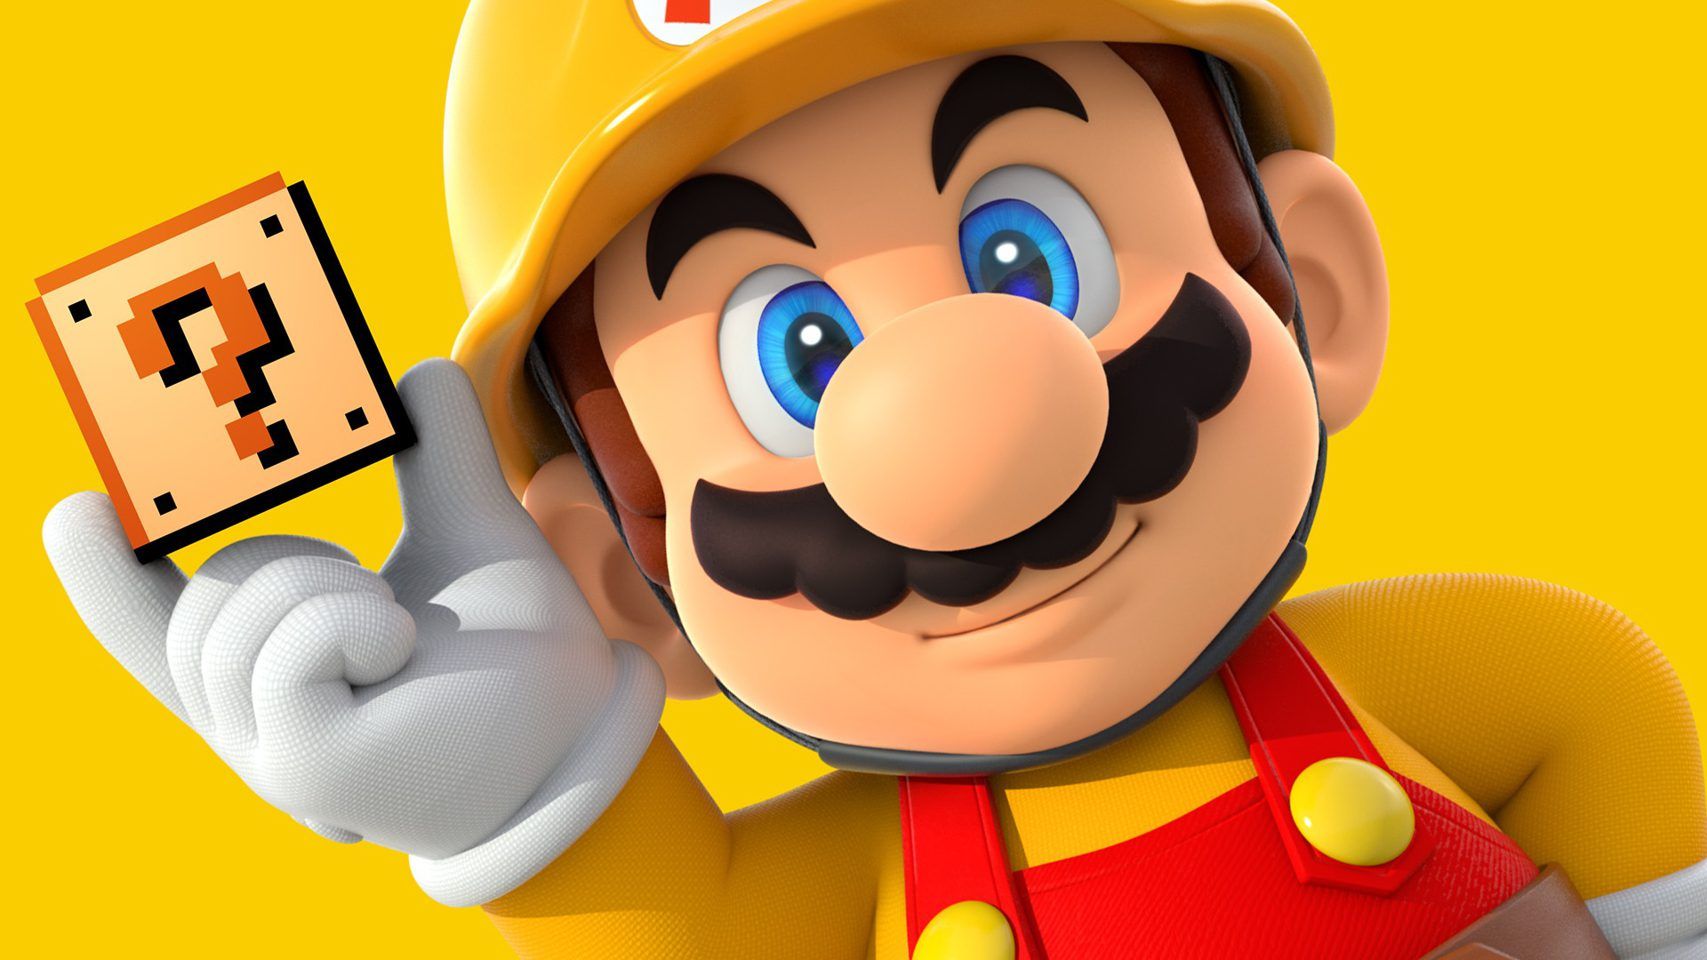 Super Mario Maker Wallpaper Tool Is Almost Like the Real Game